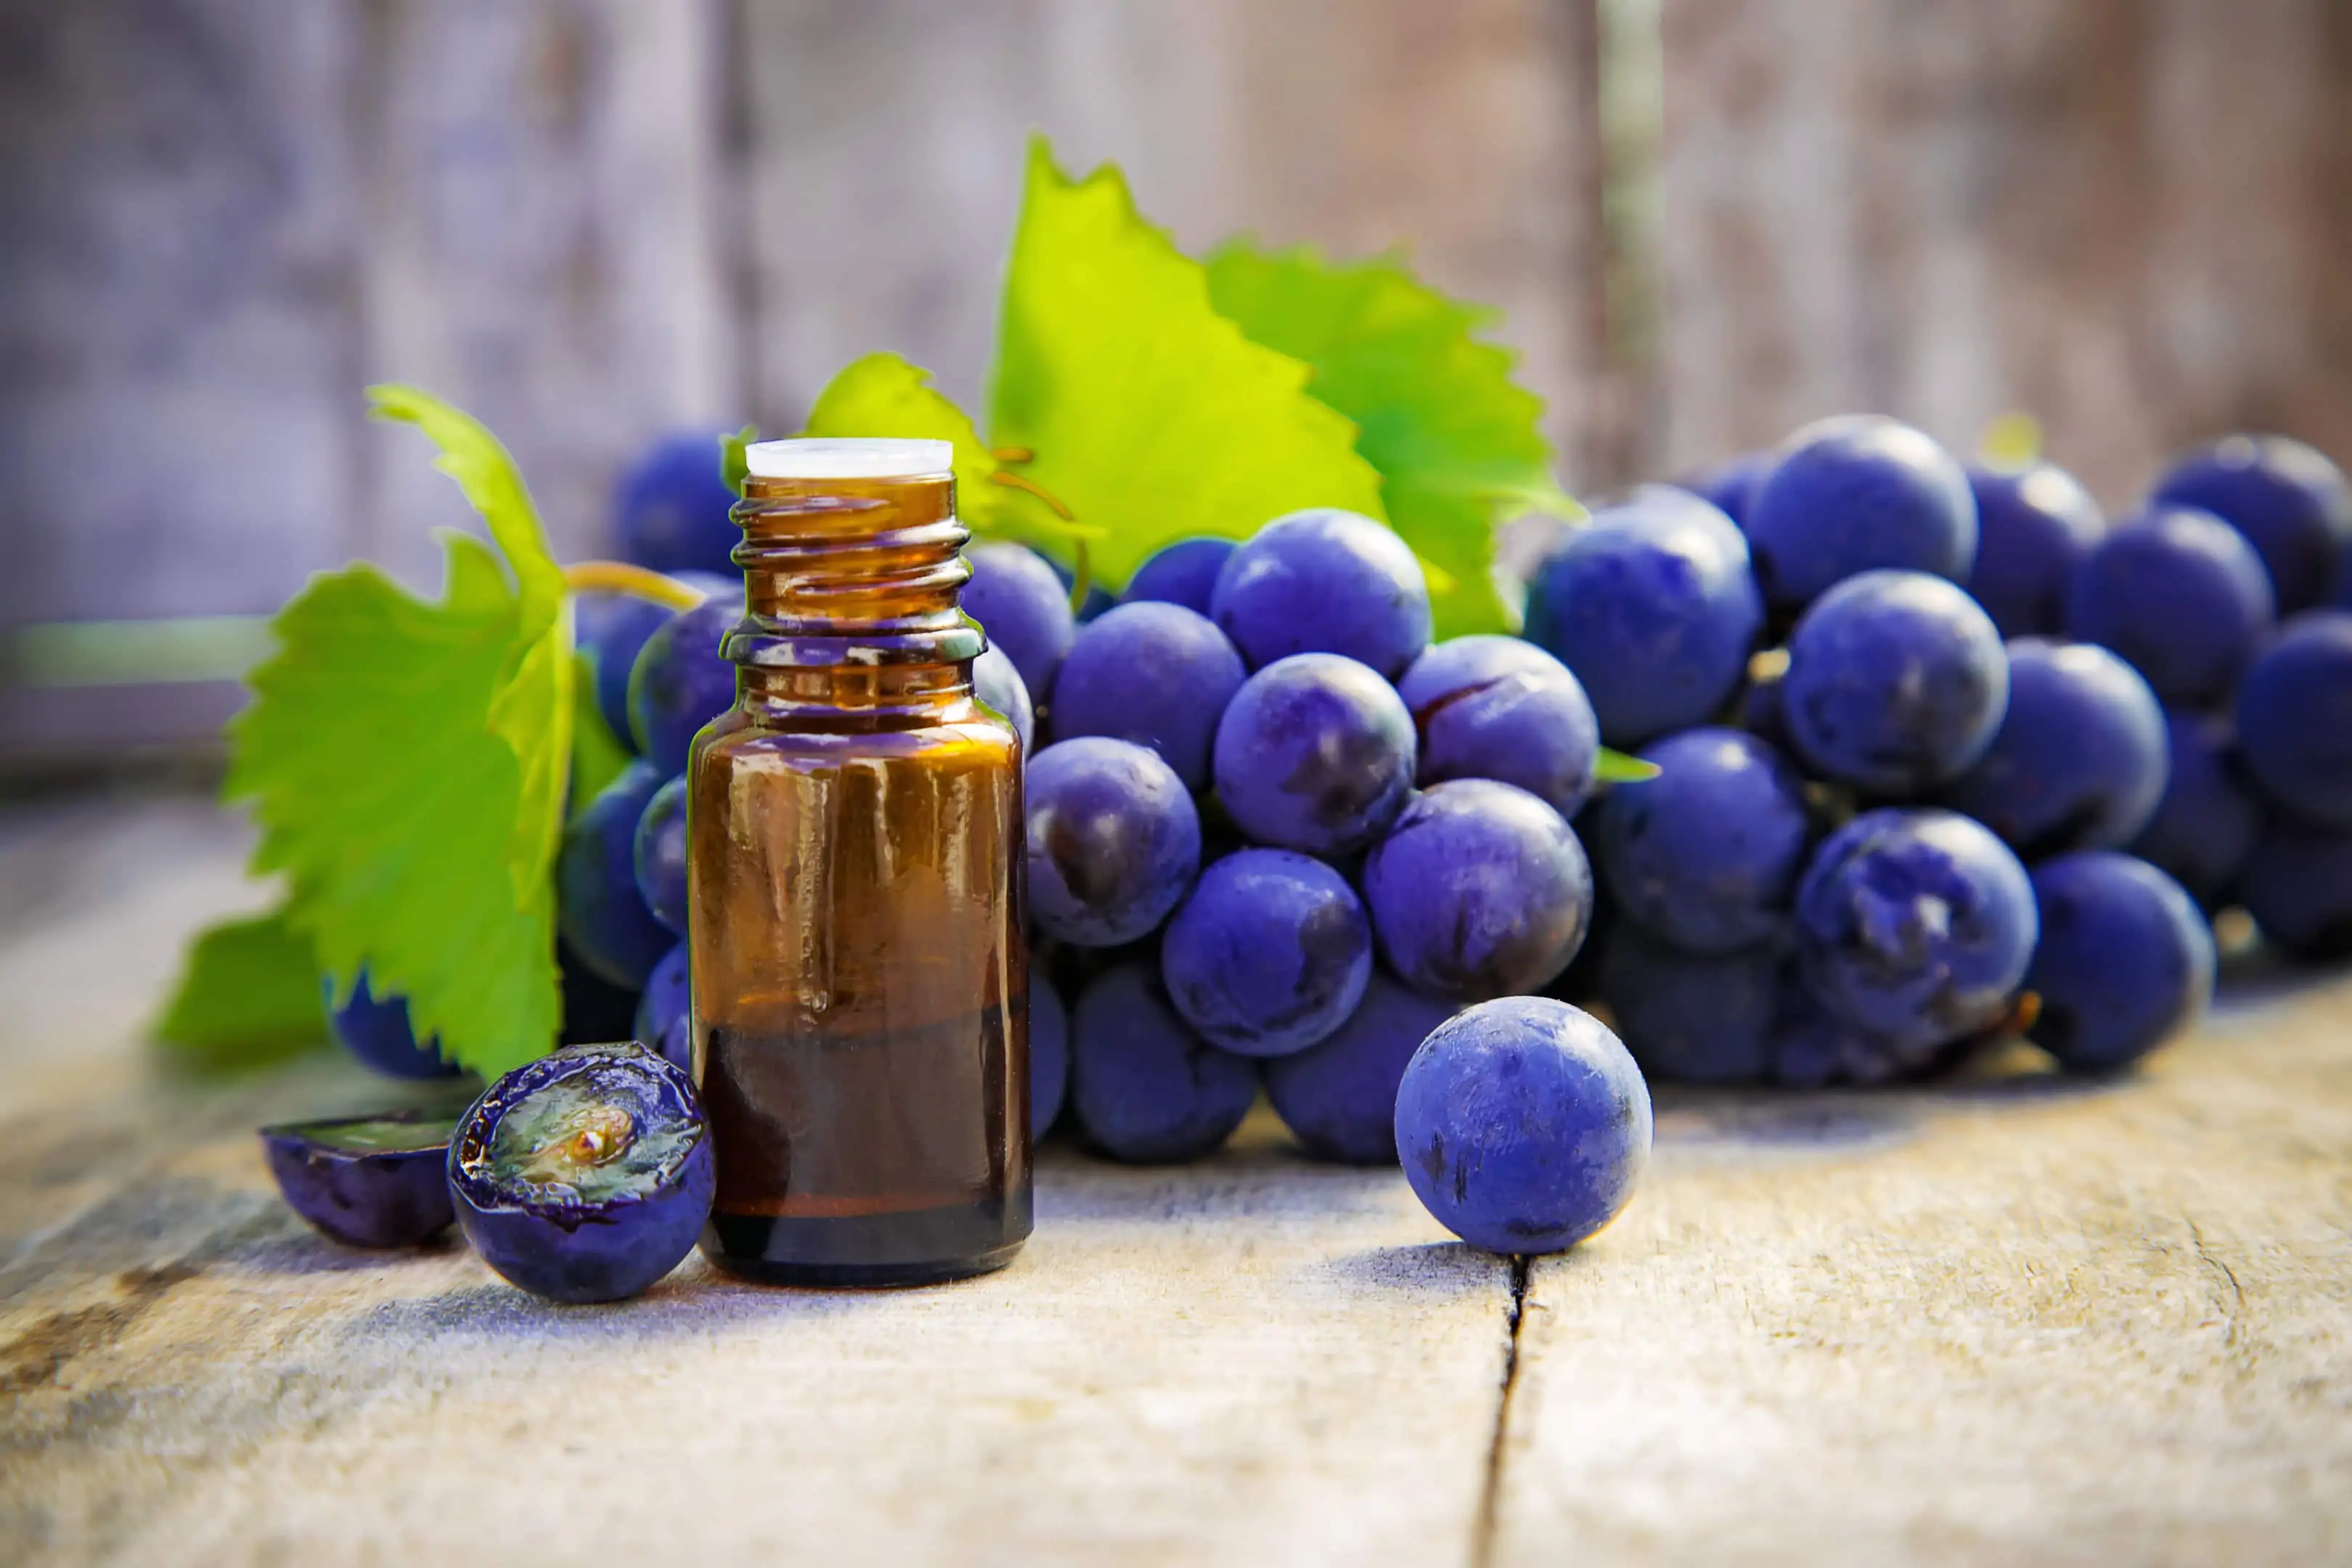 Grape seed extract in a small glass bottle with fresh grapes